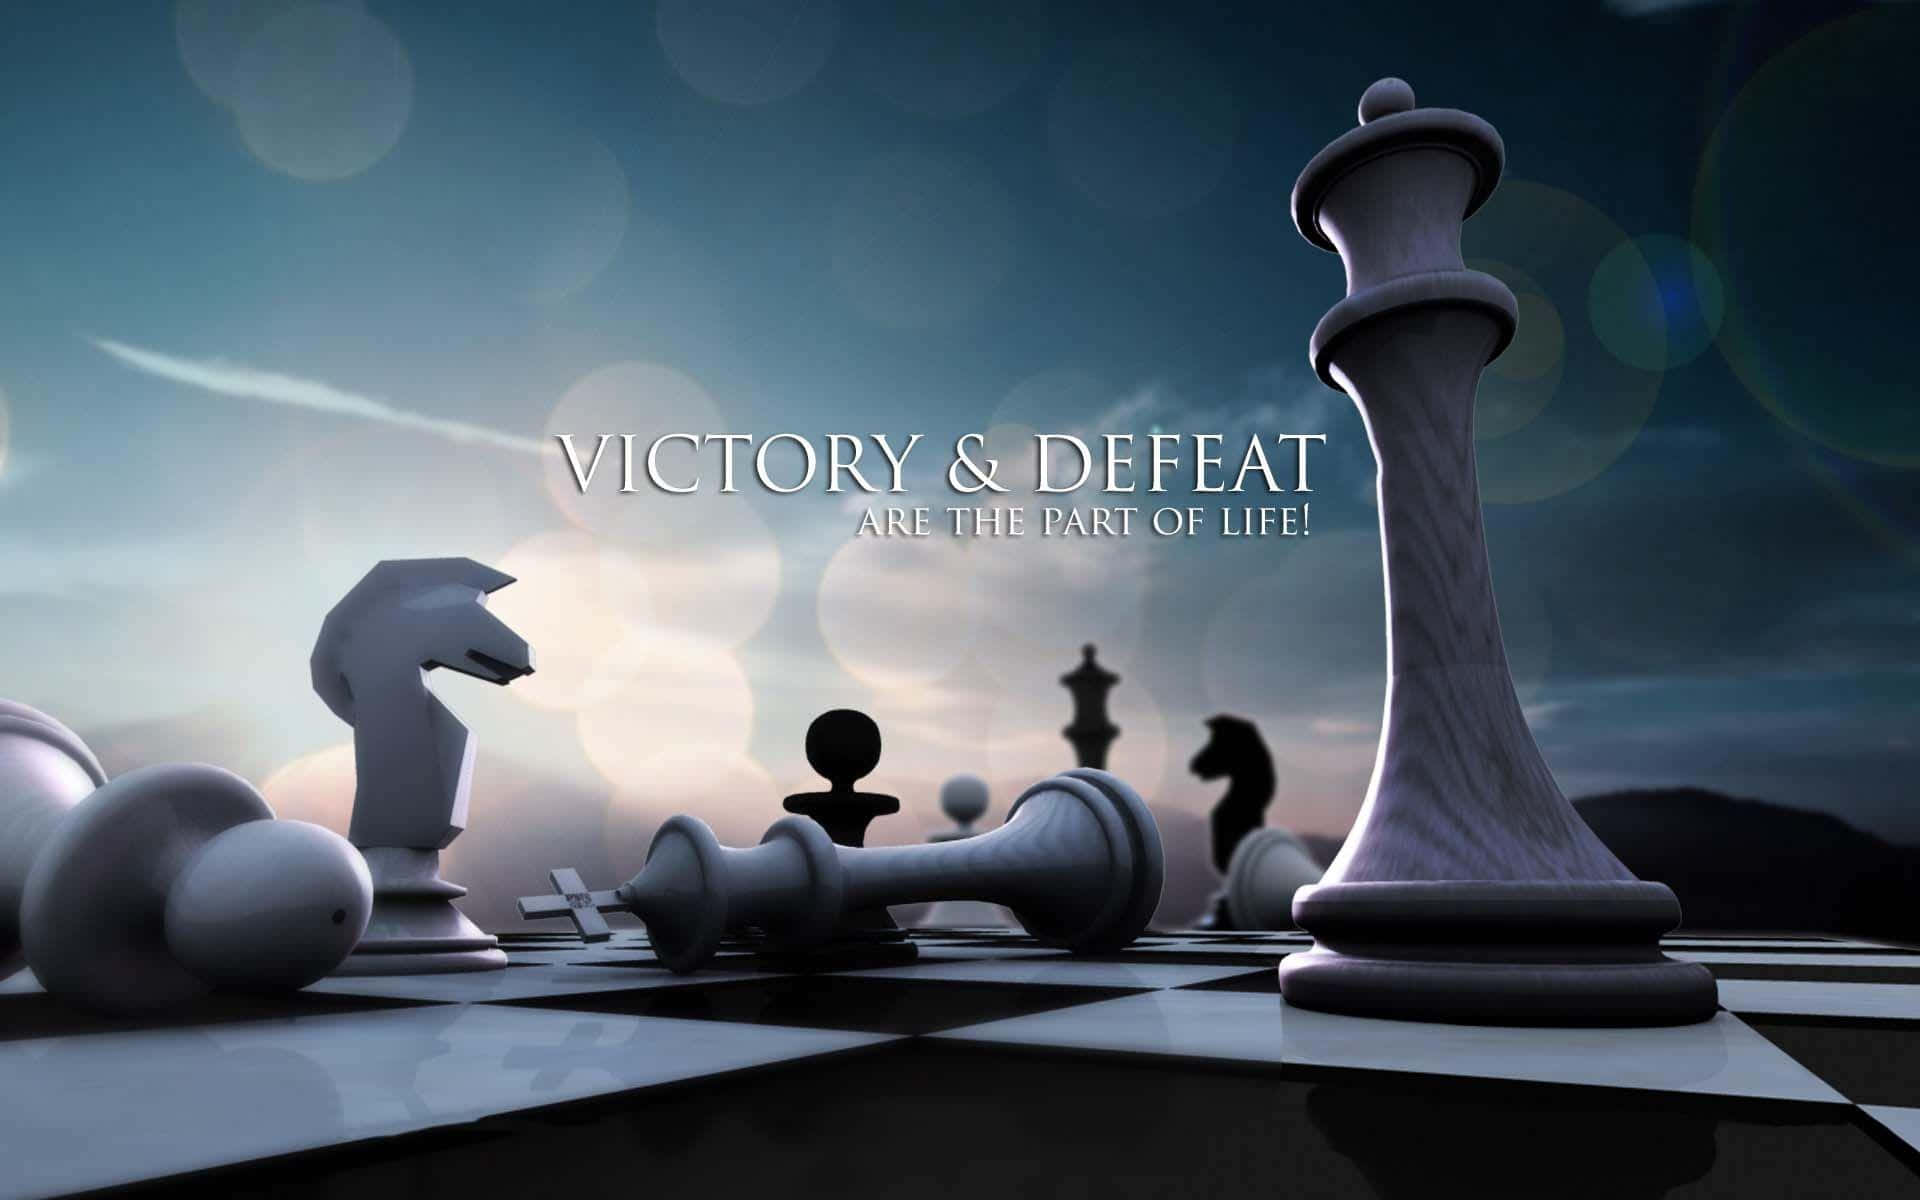 Victory Background